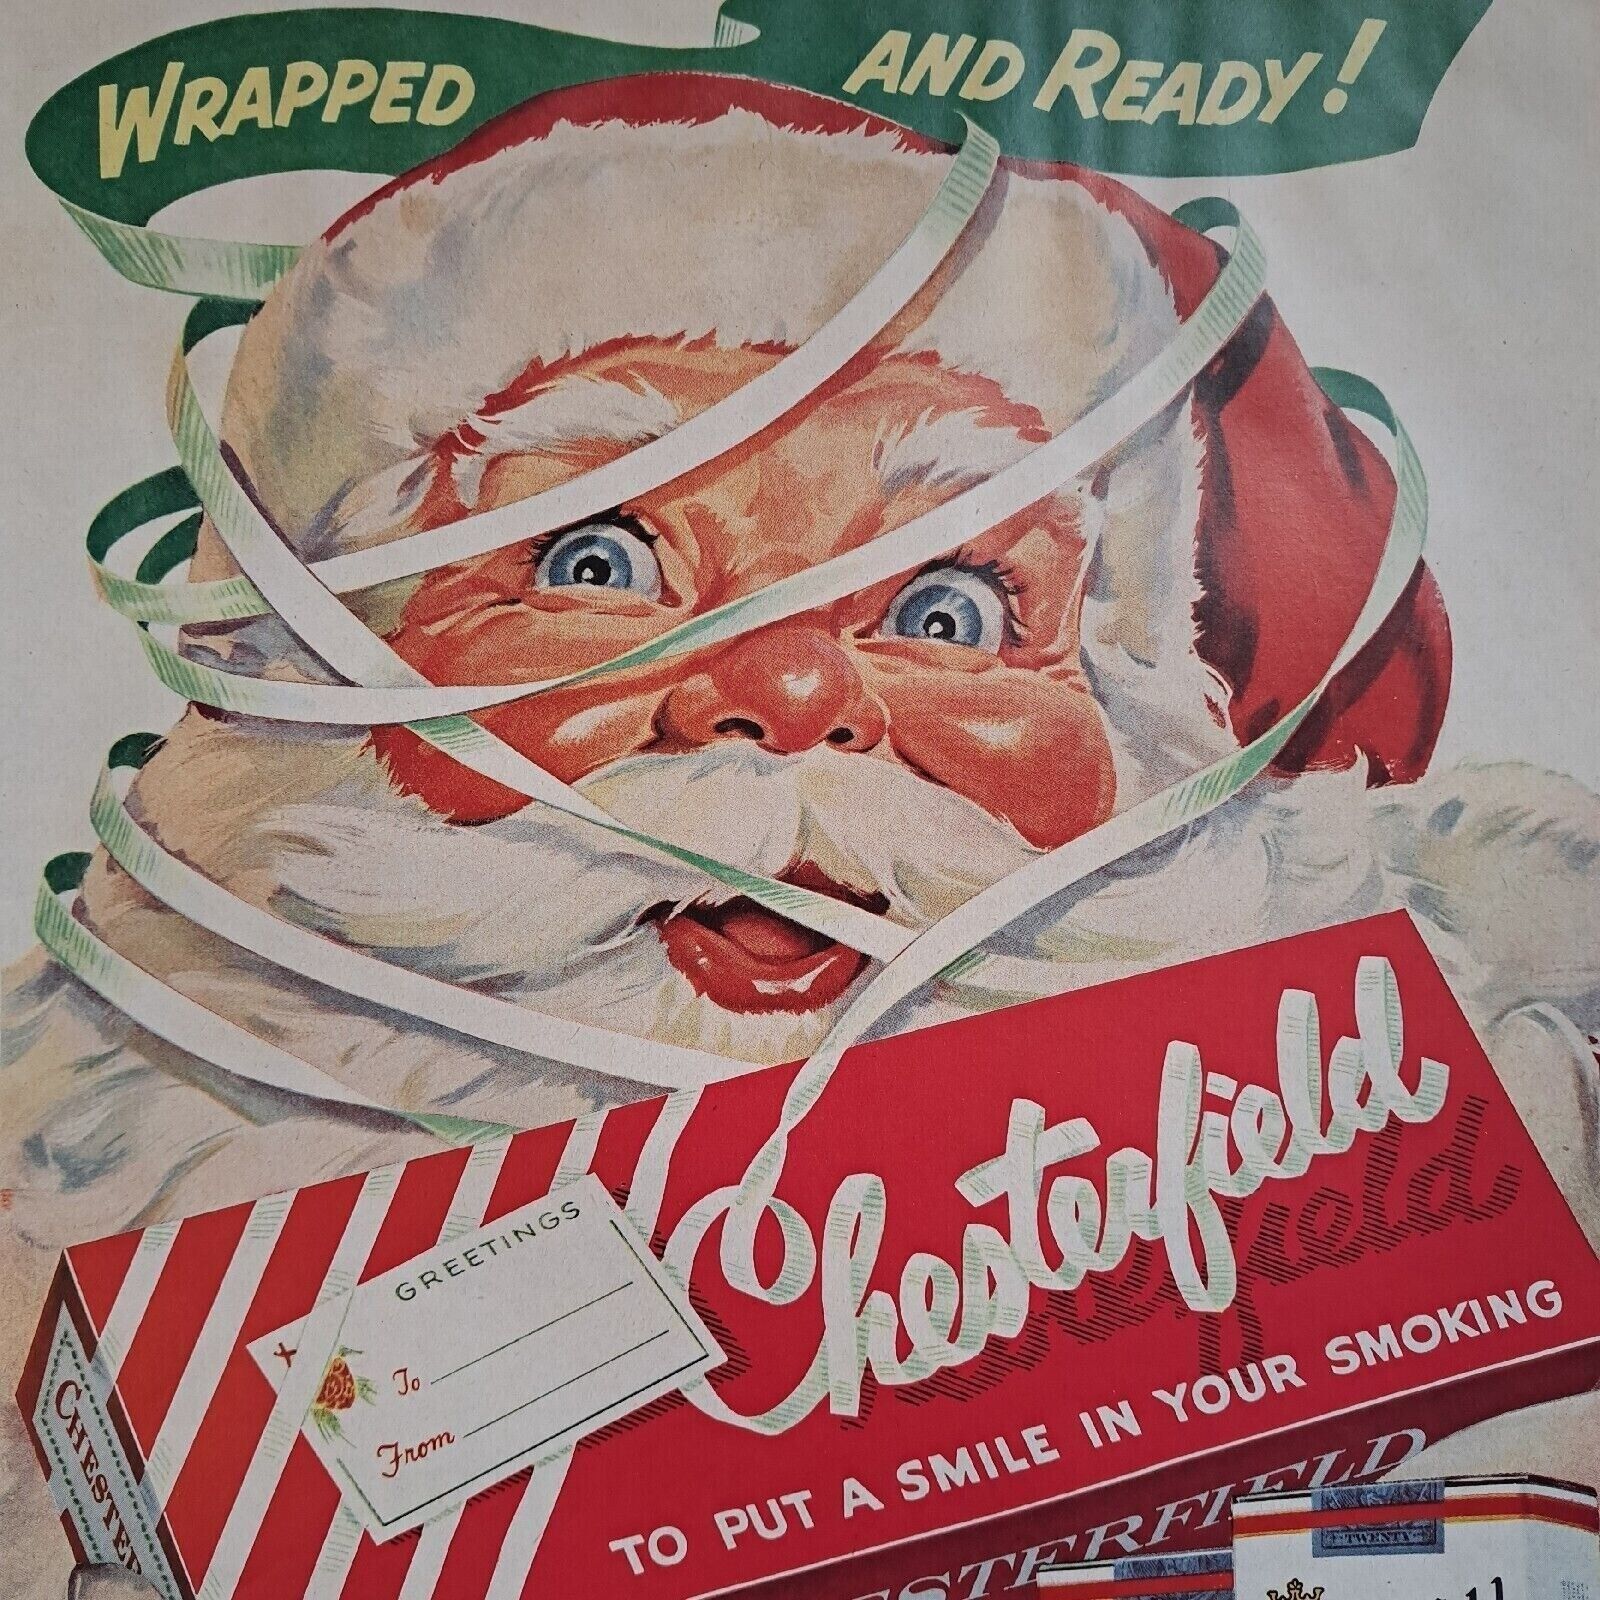 1955 Print Ad CHESTERFIELD SANTA SMOKING WRAPPED AND READY MADE WITH ACCURAY PG1